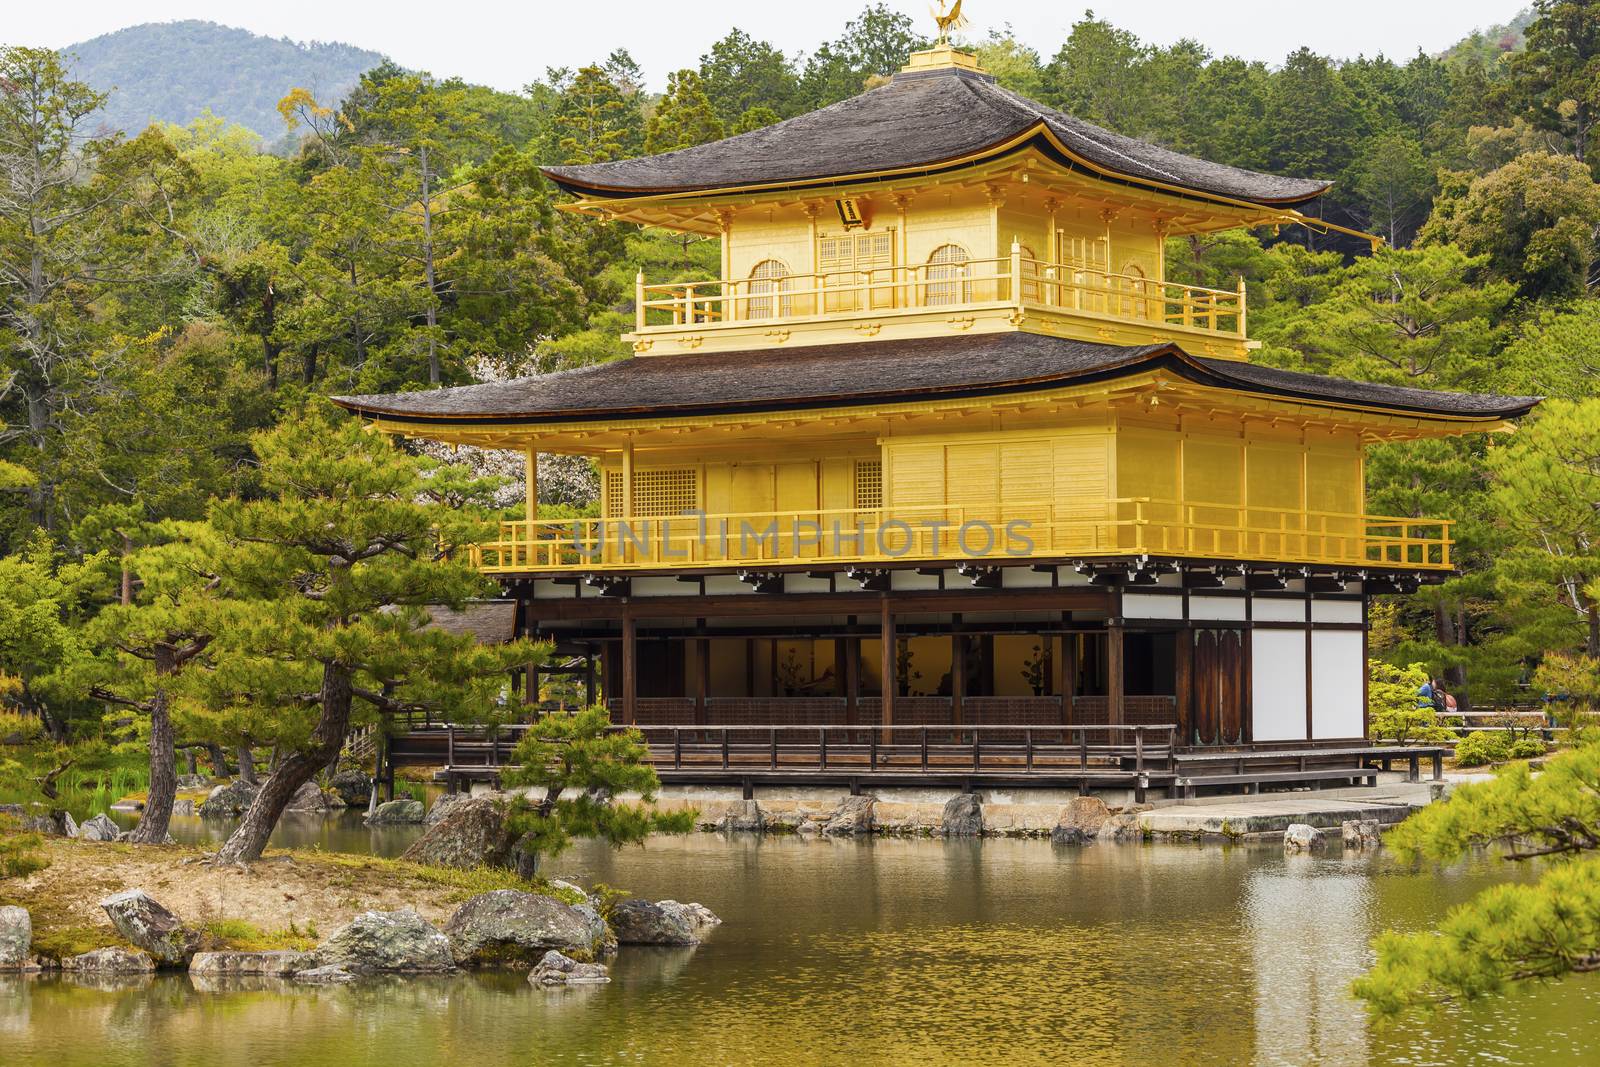 Kinkakuji Temple (The Golden Pavilion) in Kyoto, Japan. by kawing921